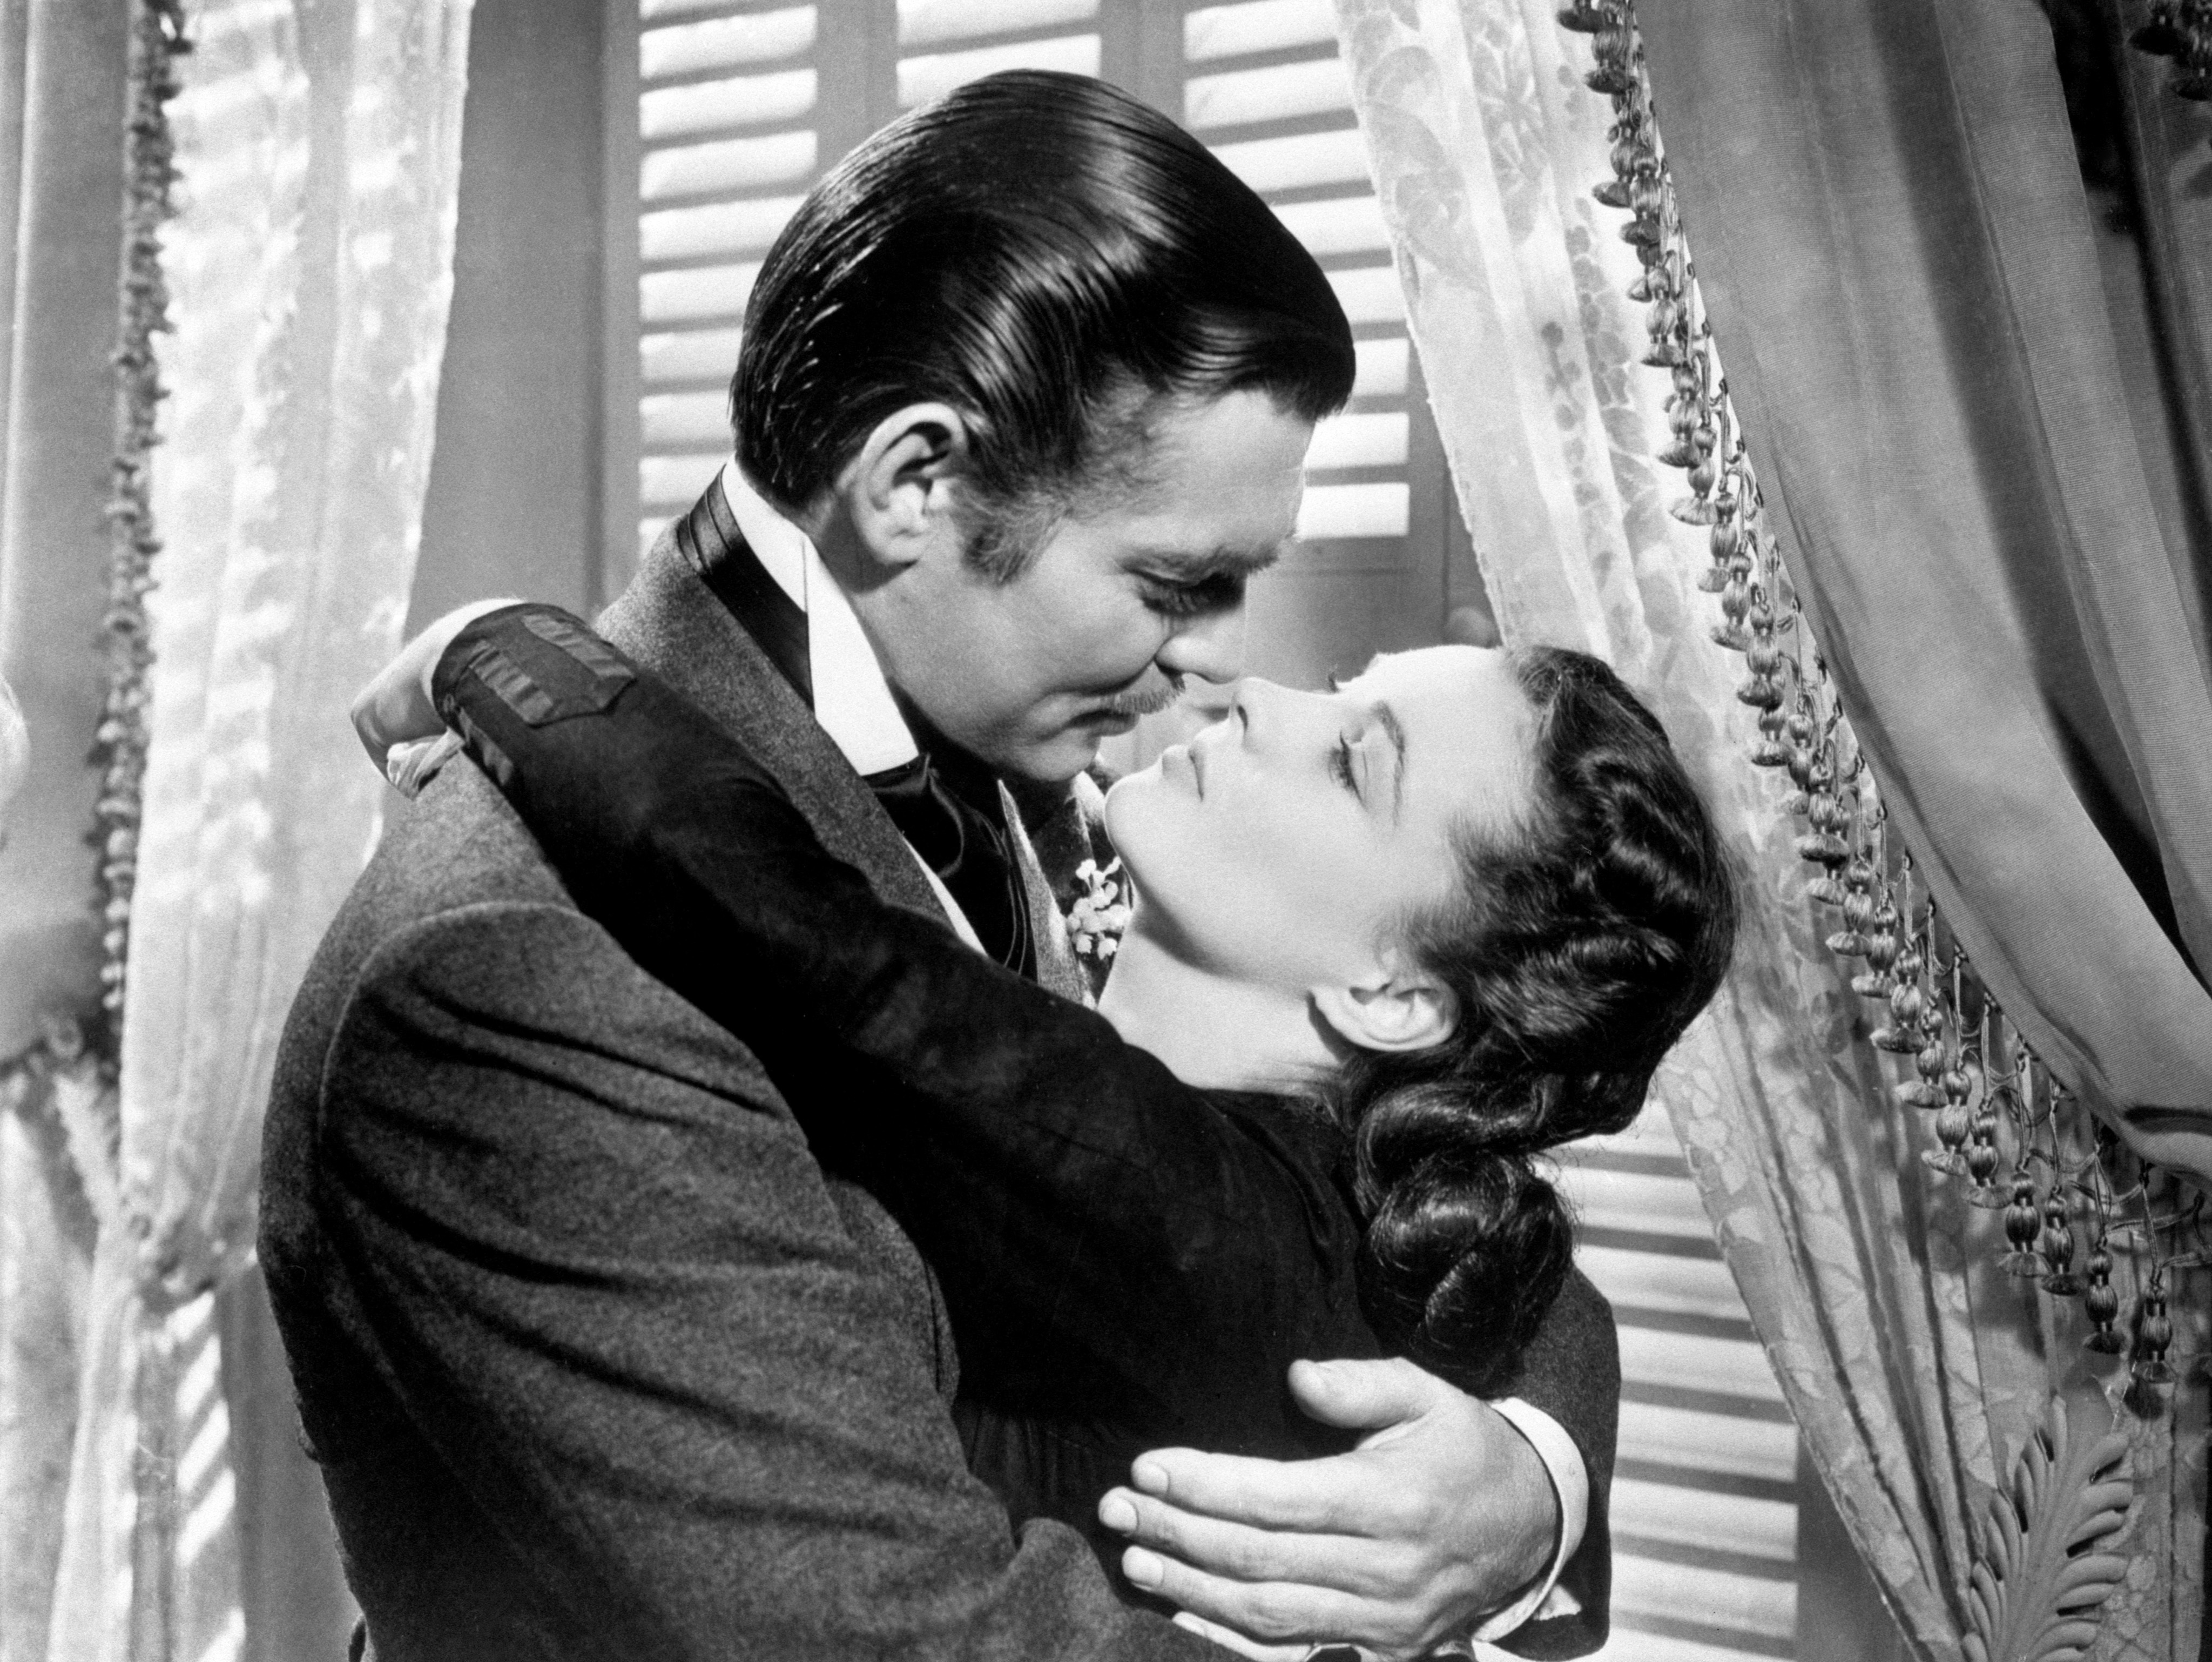 A scene from the movie Gone With The Wind, starring Clark Gable and Vivien Leigh (MGM/PA Archive/PA Images)